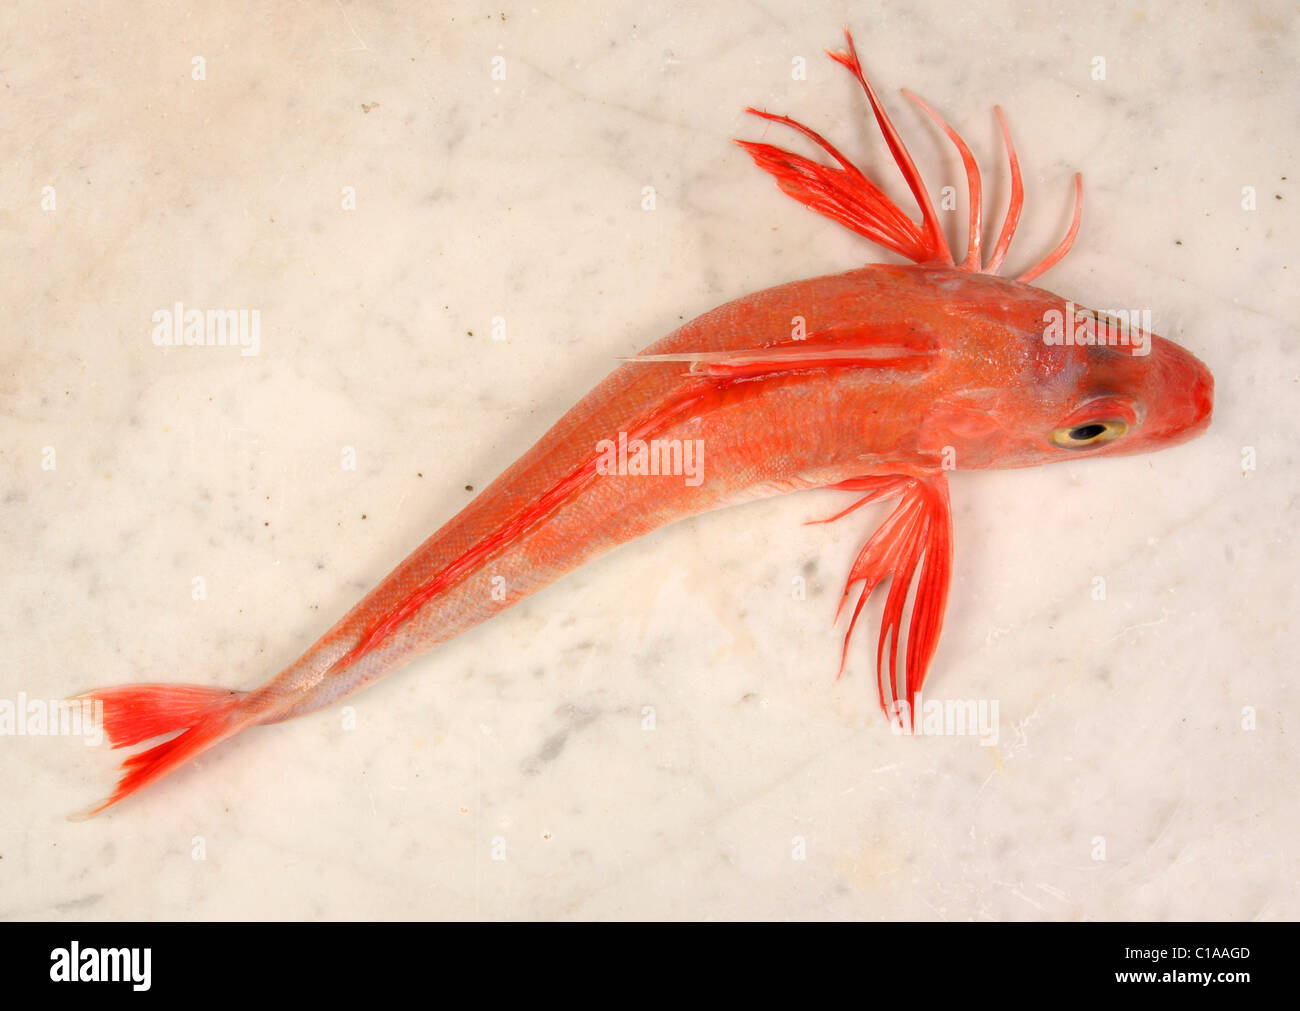 Red Gurnard fish on a marble slab Stock Photo